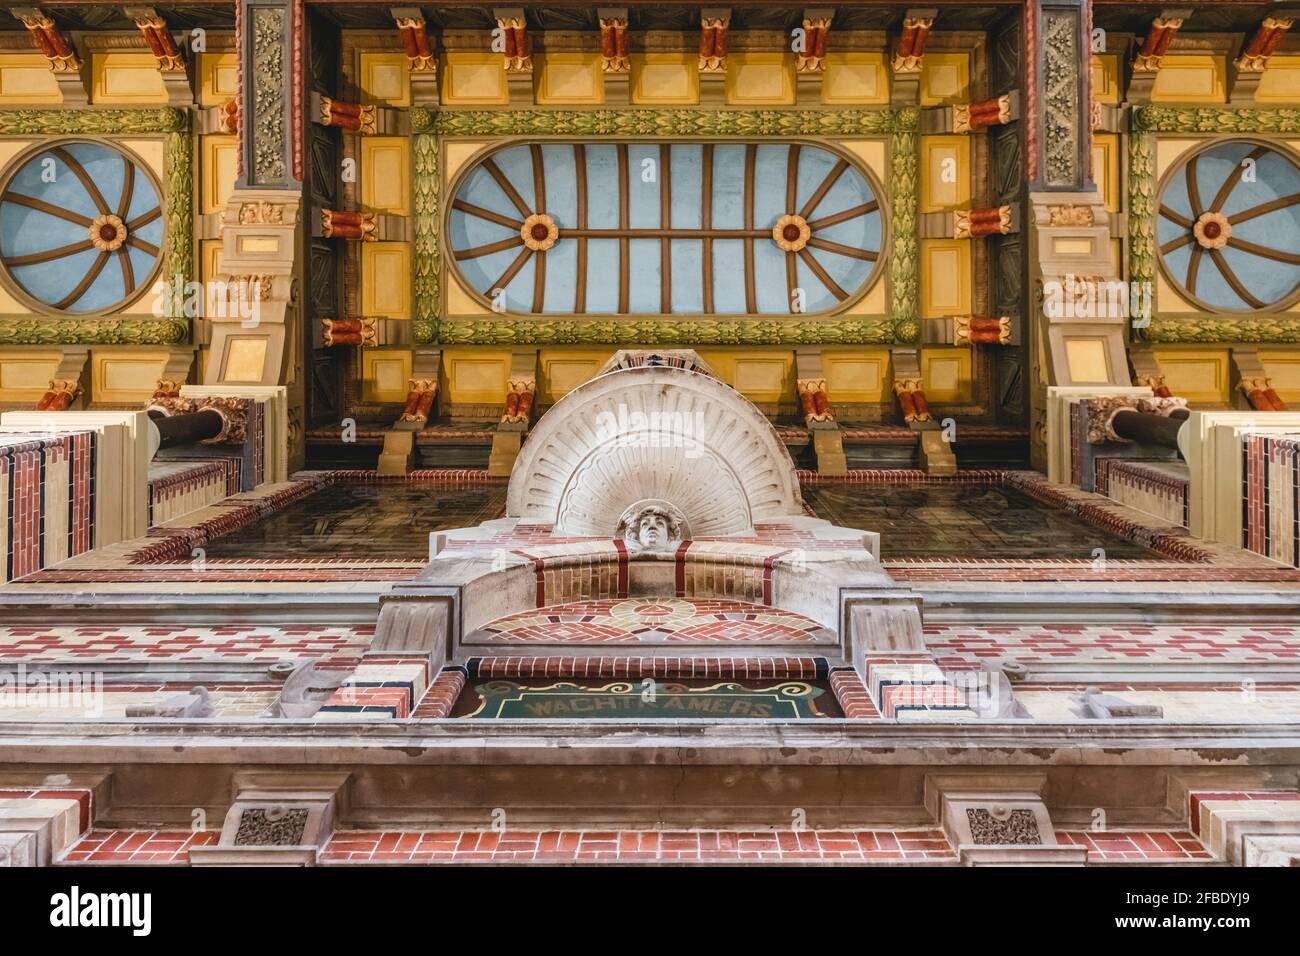 Netherlands, Groningen, Ornate wall and ceiling of historical railroad station Stock Photo